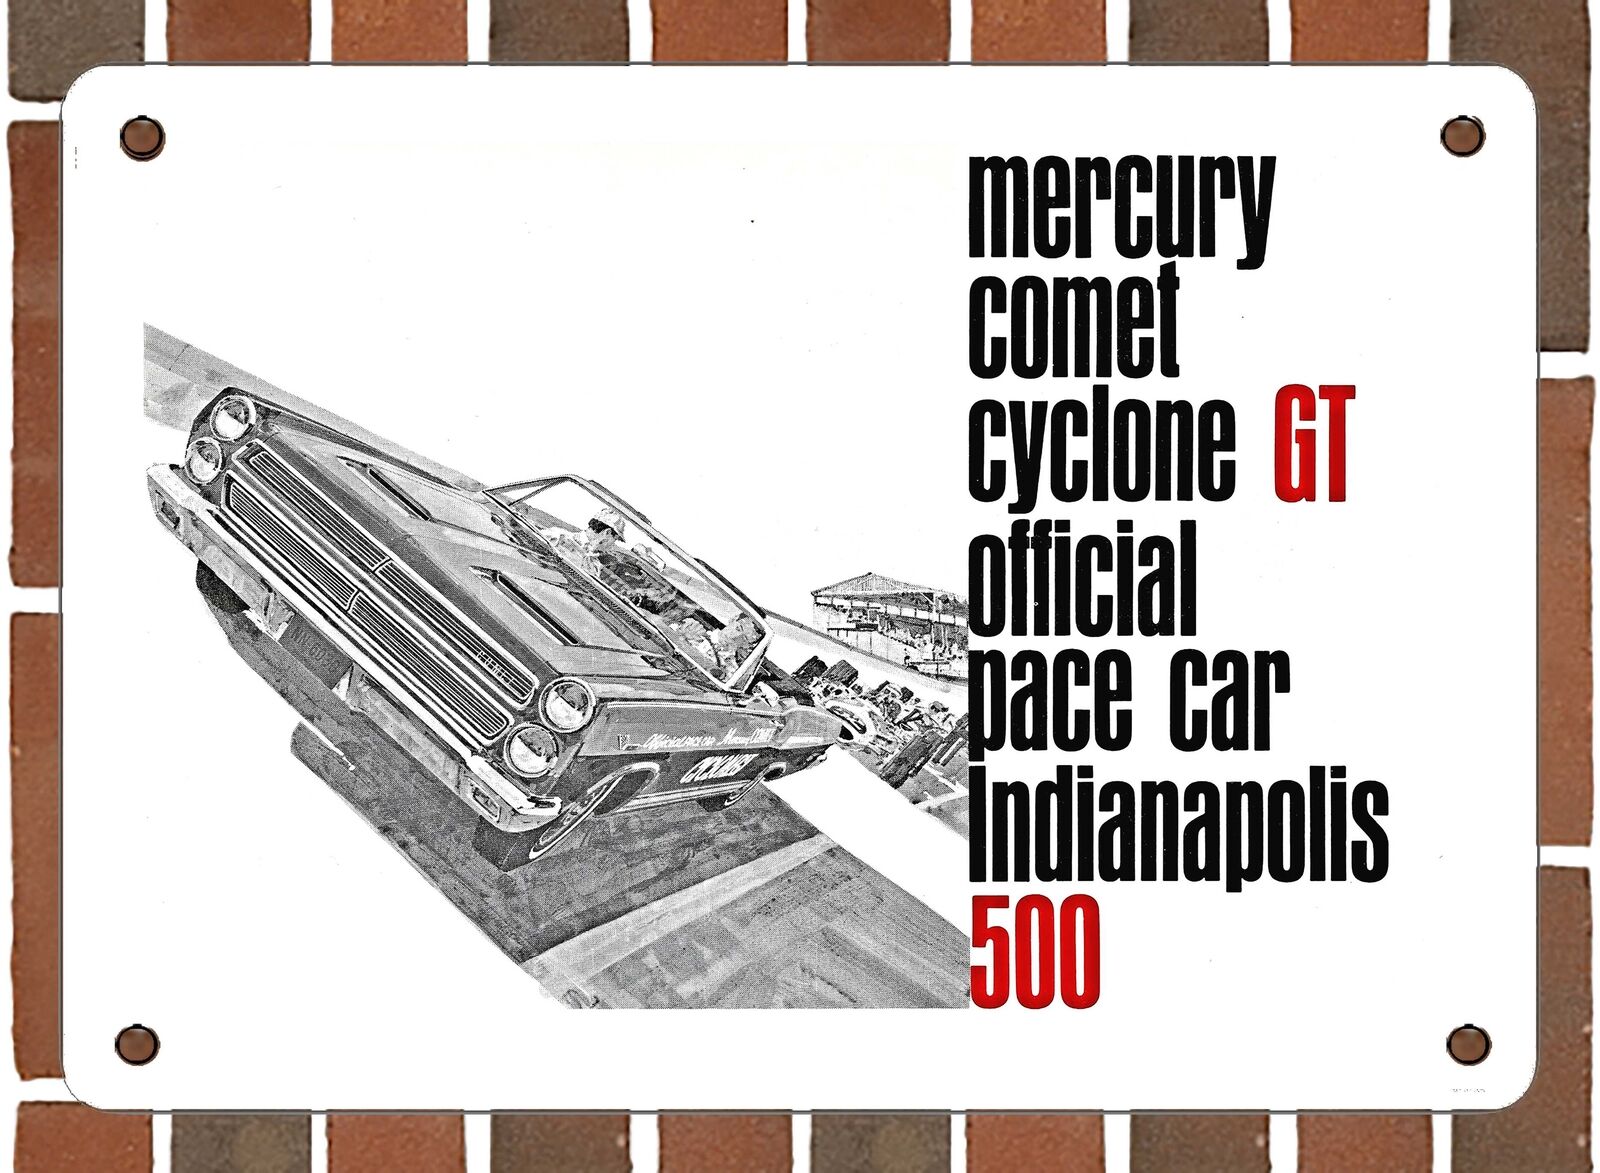 METAL SIGN - 1966 Mercury Comet Cyclone GT Indy 500 Pace Car - 10x14 Inches